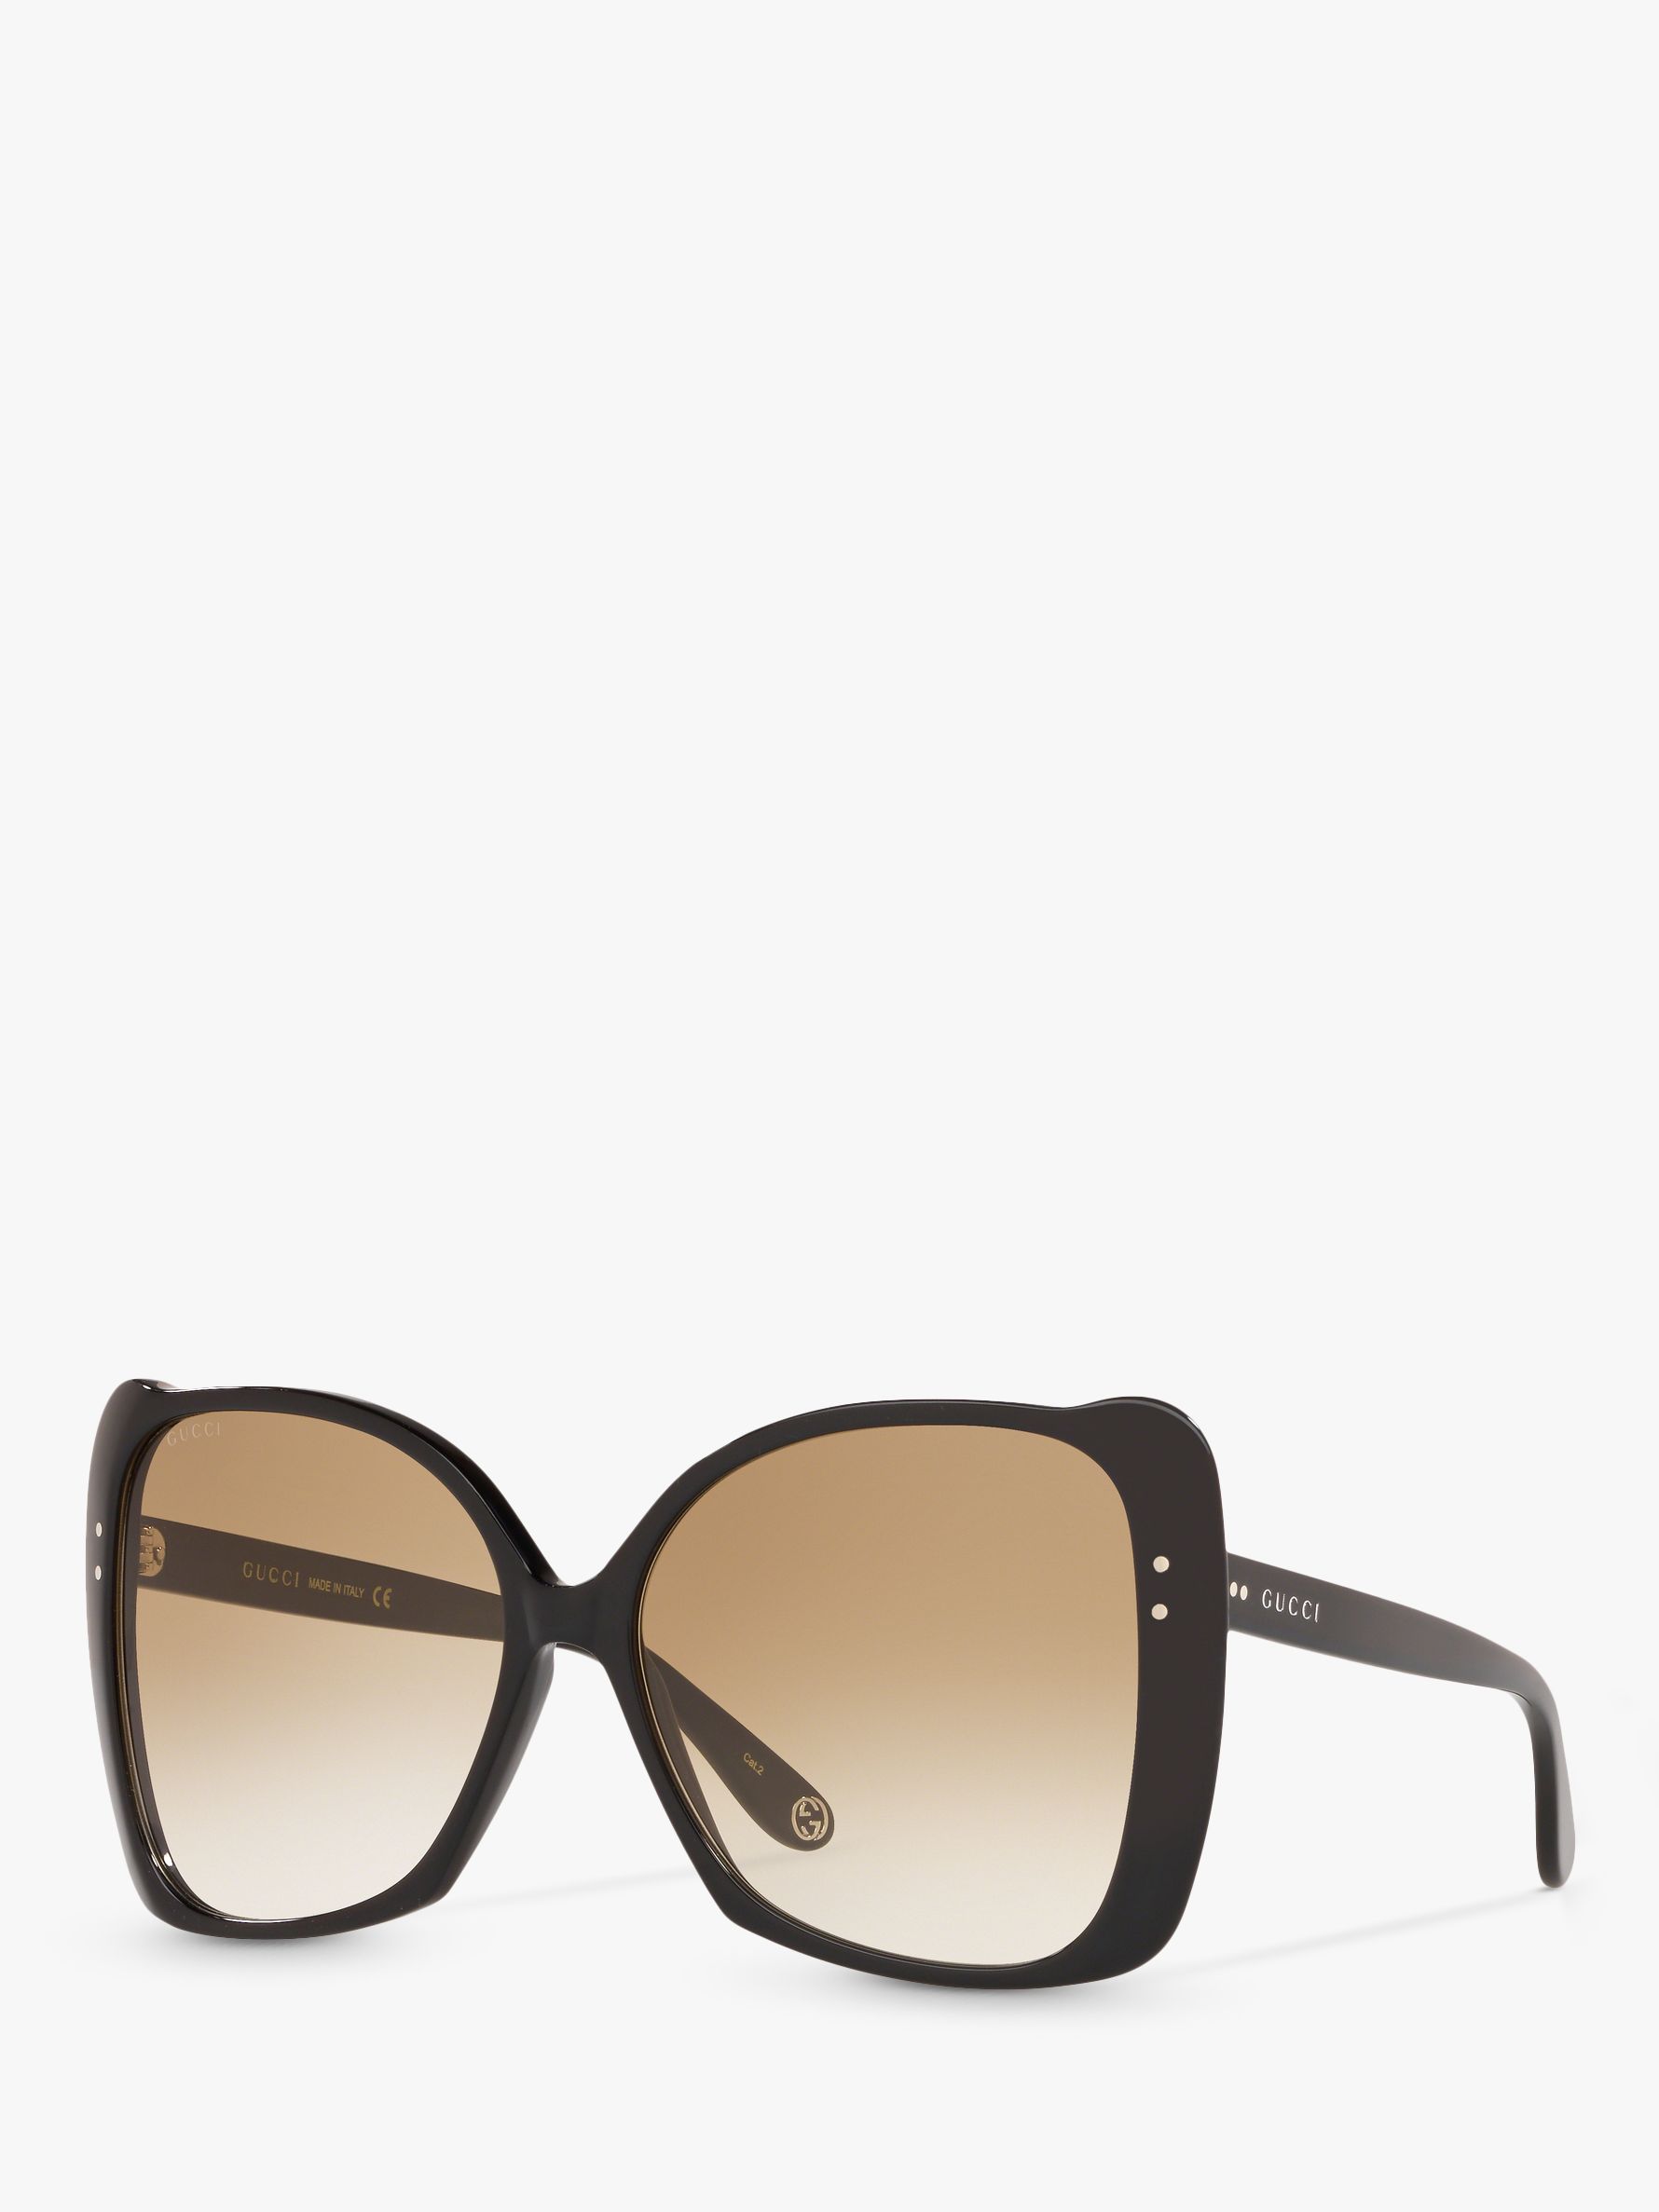 butterfly gucci sunglasses